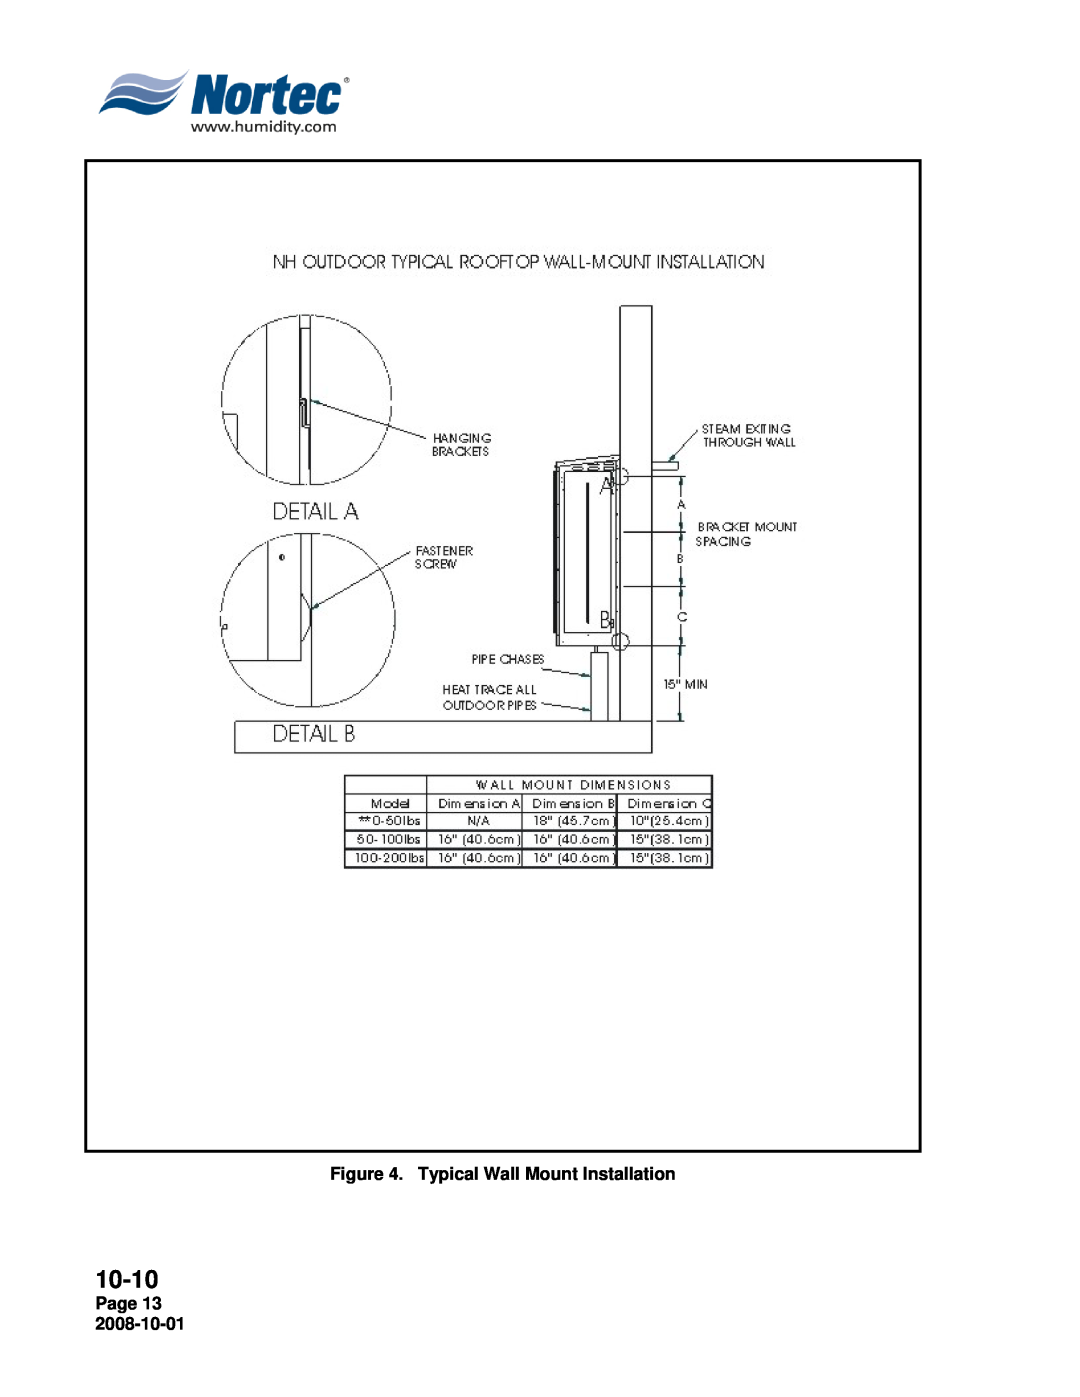 Nortec Industries NH Series installation manual 10-10, Typical Wall Mount Installation, Page 